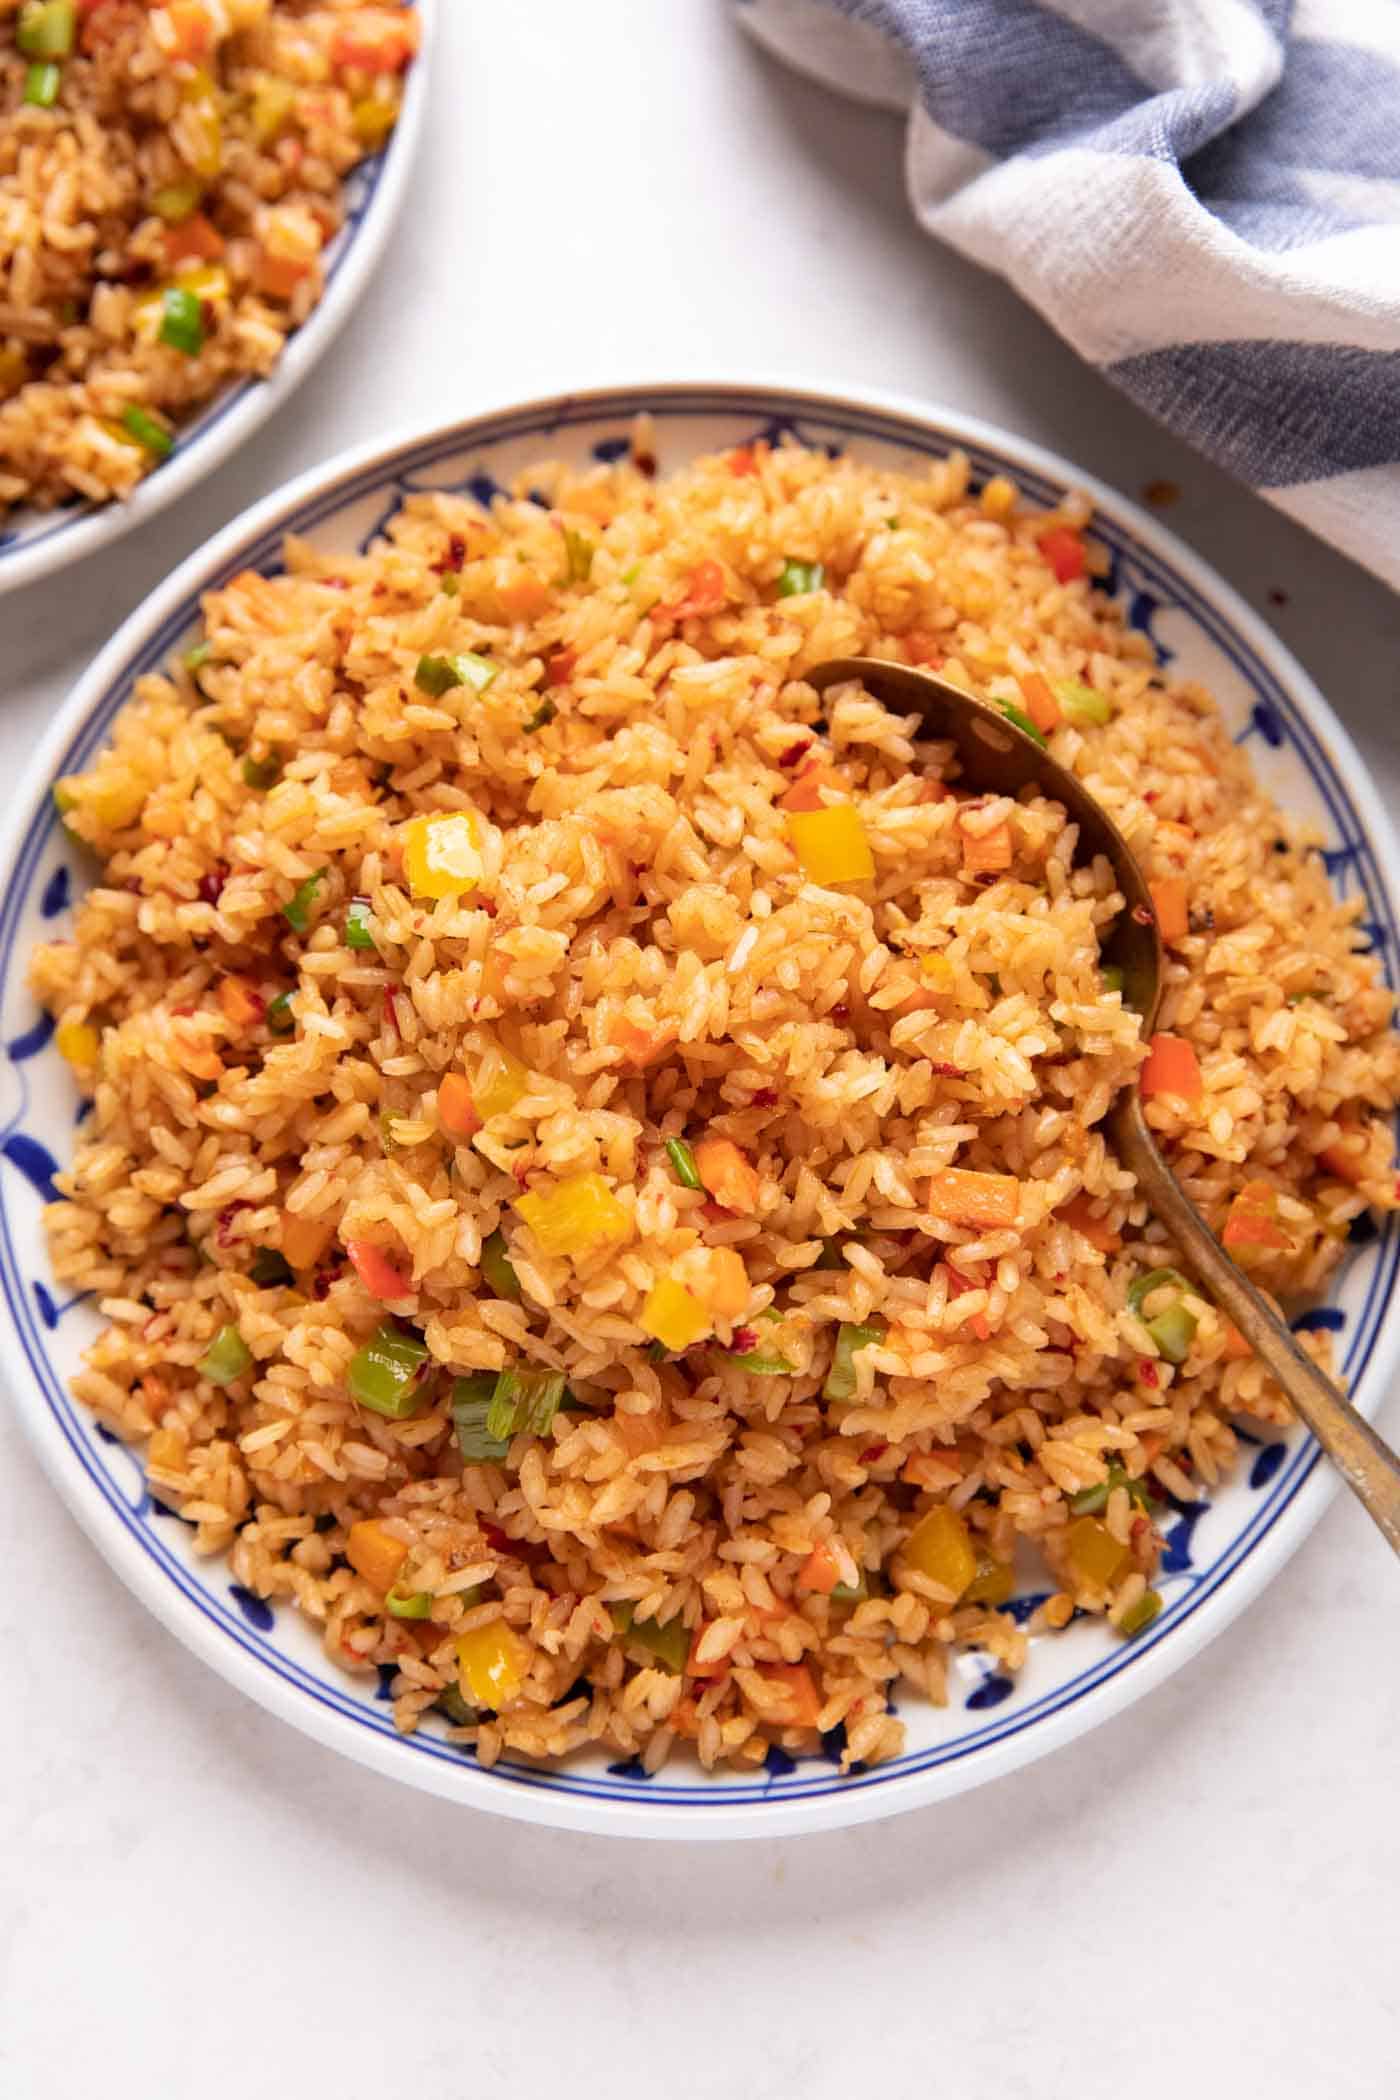 Picture of chilli garlic fried rice served on a white and blue plate